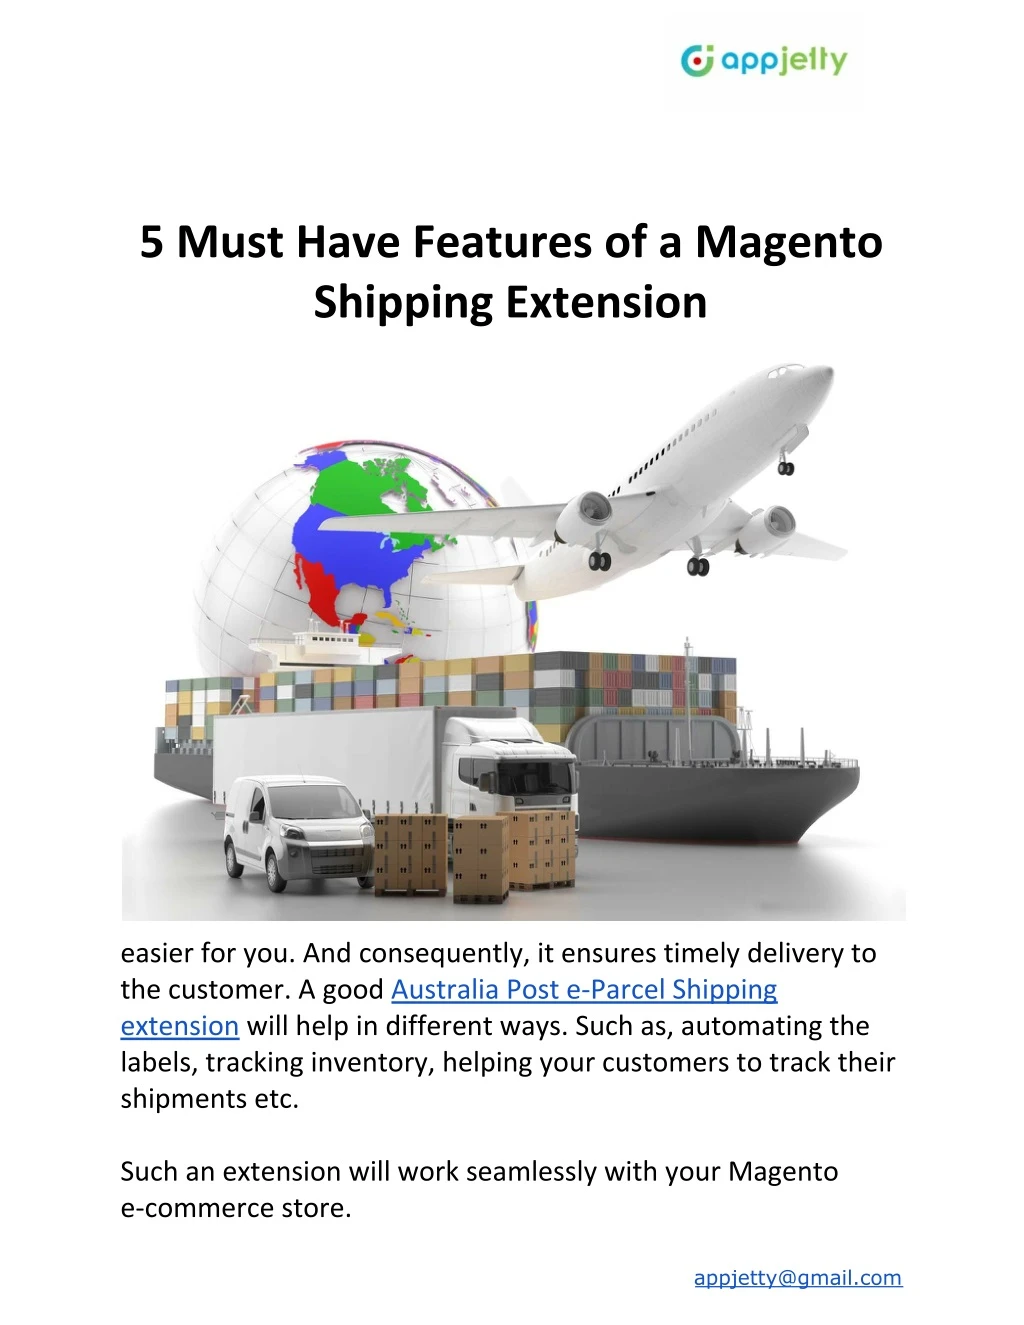 5 must have features of a magento shipping